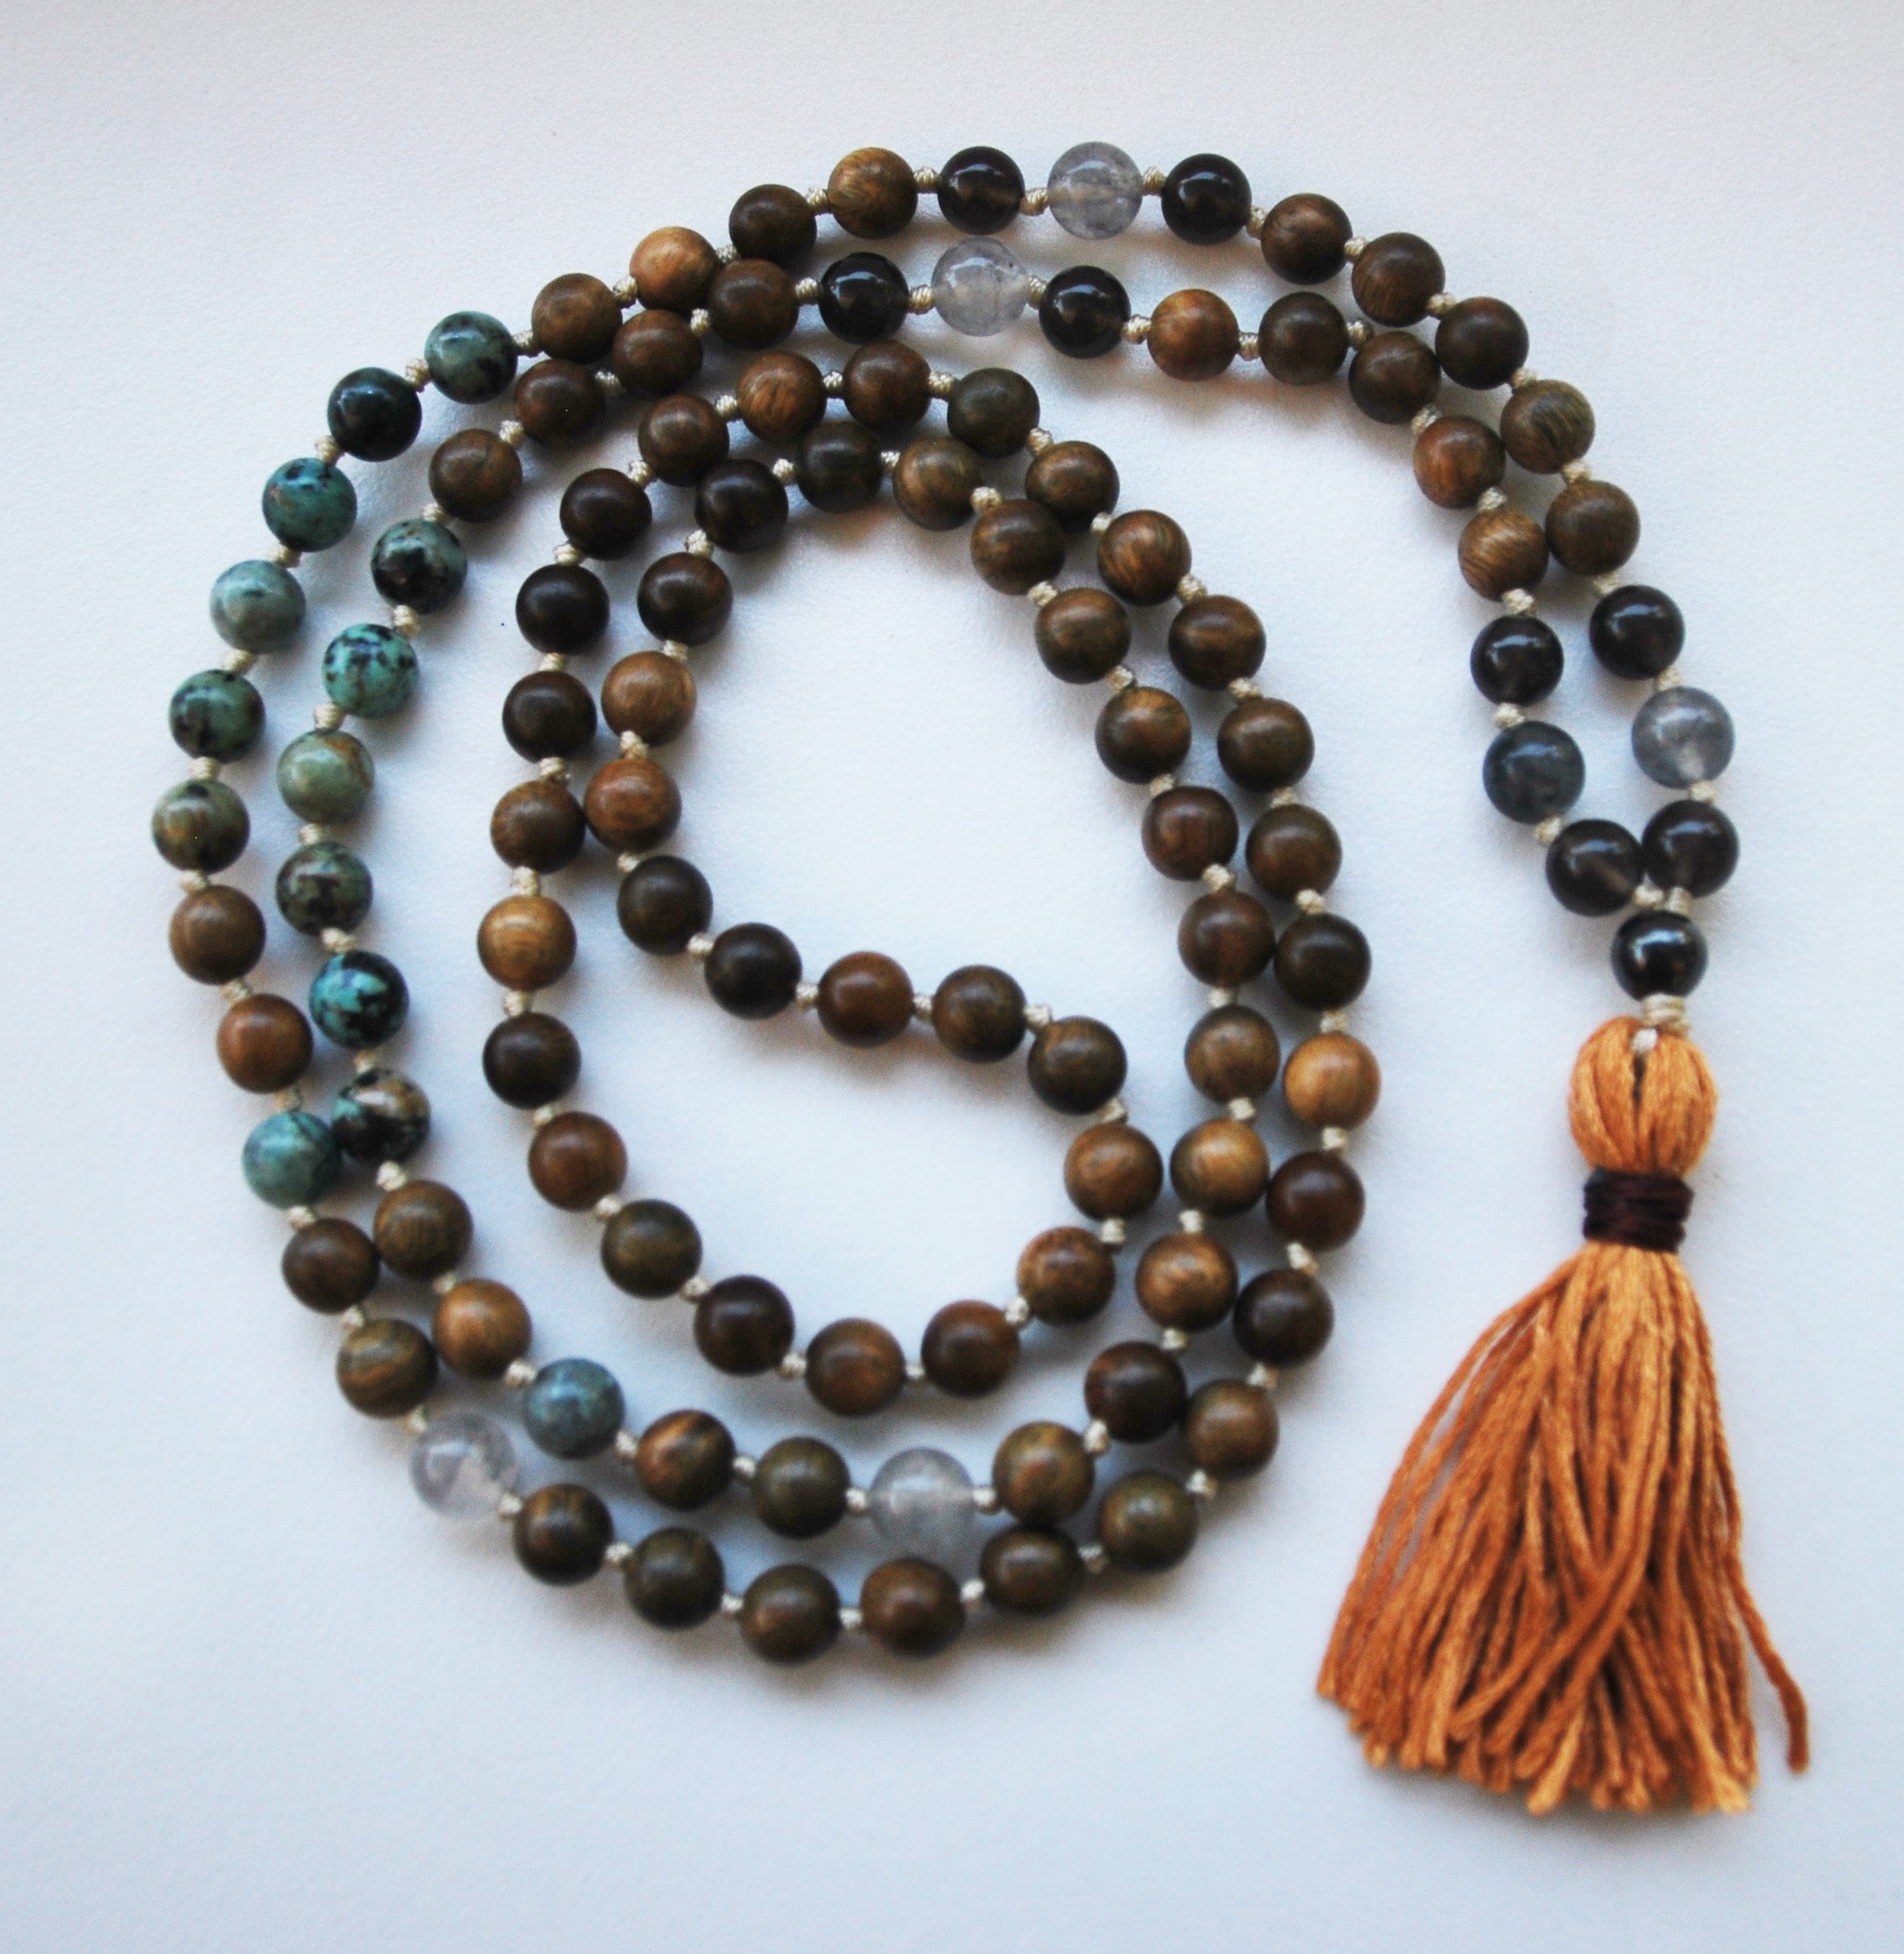 8mm Green Sandalwood & African Turquoise 108 Knotted Mala Necklace with Cotton Tassel